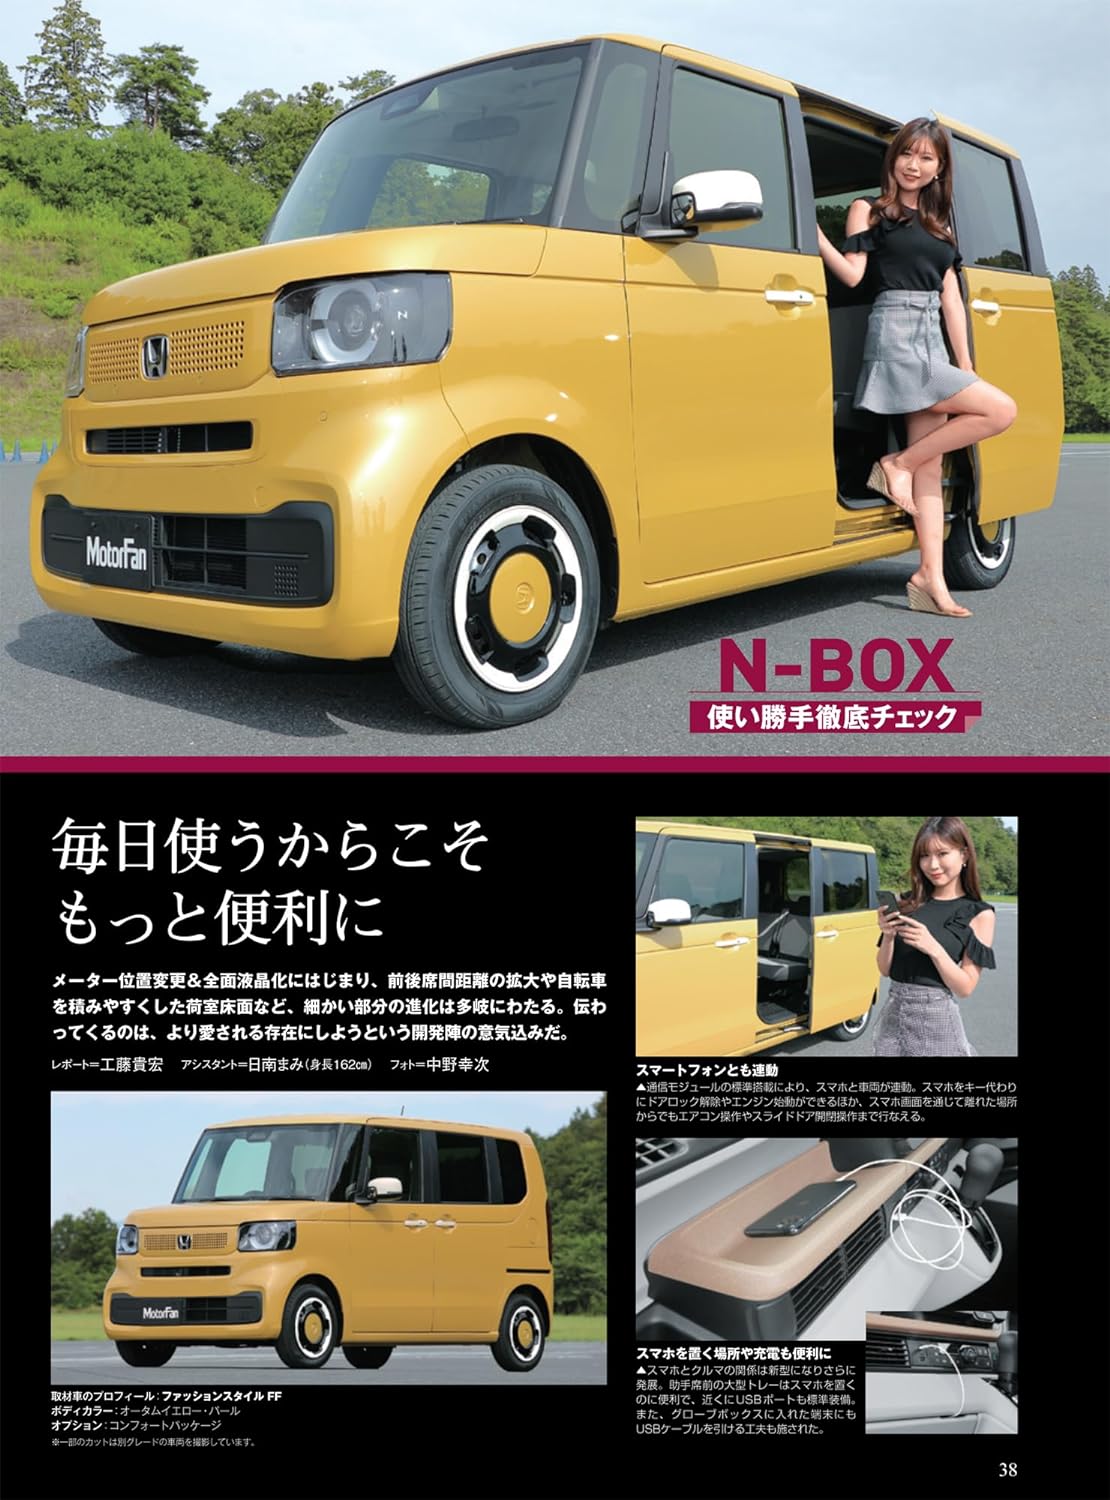 All About Honda N-BOX New Model